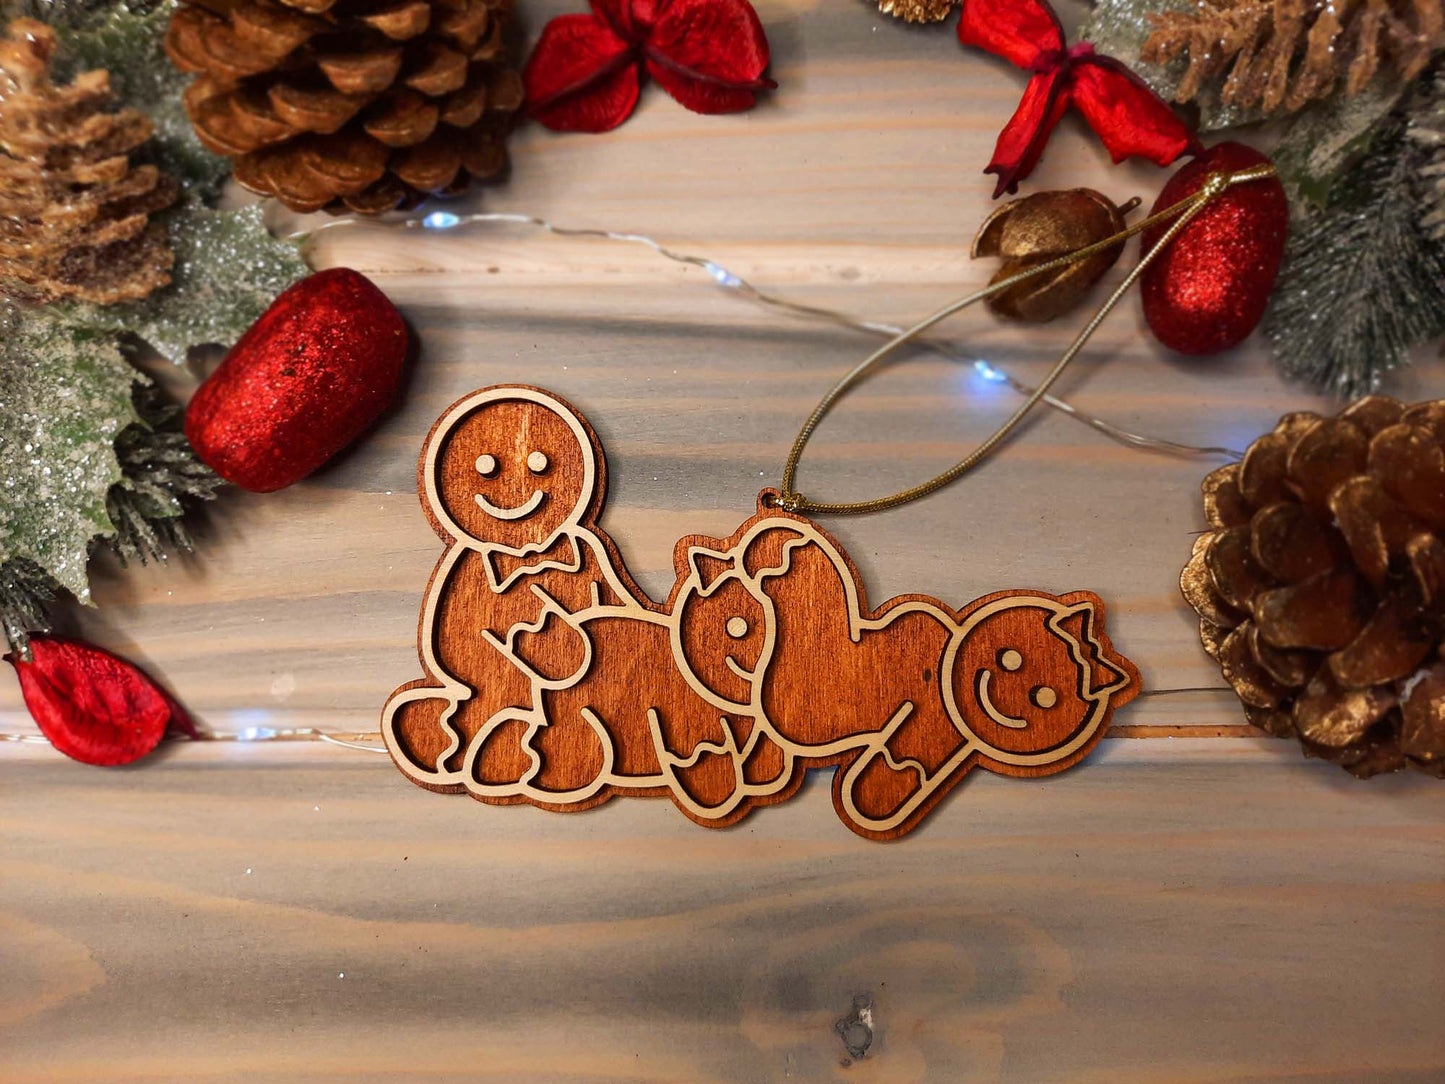 Threesome Sex Gingerbread - Christmas Decoration ver1 - PG Factory